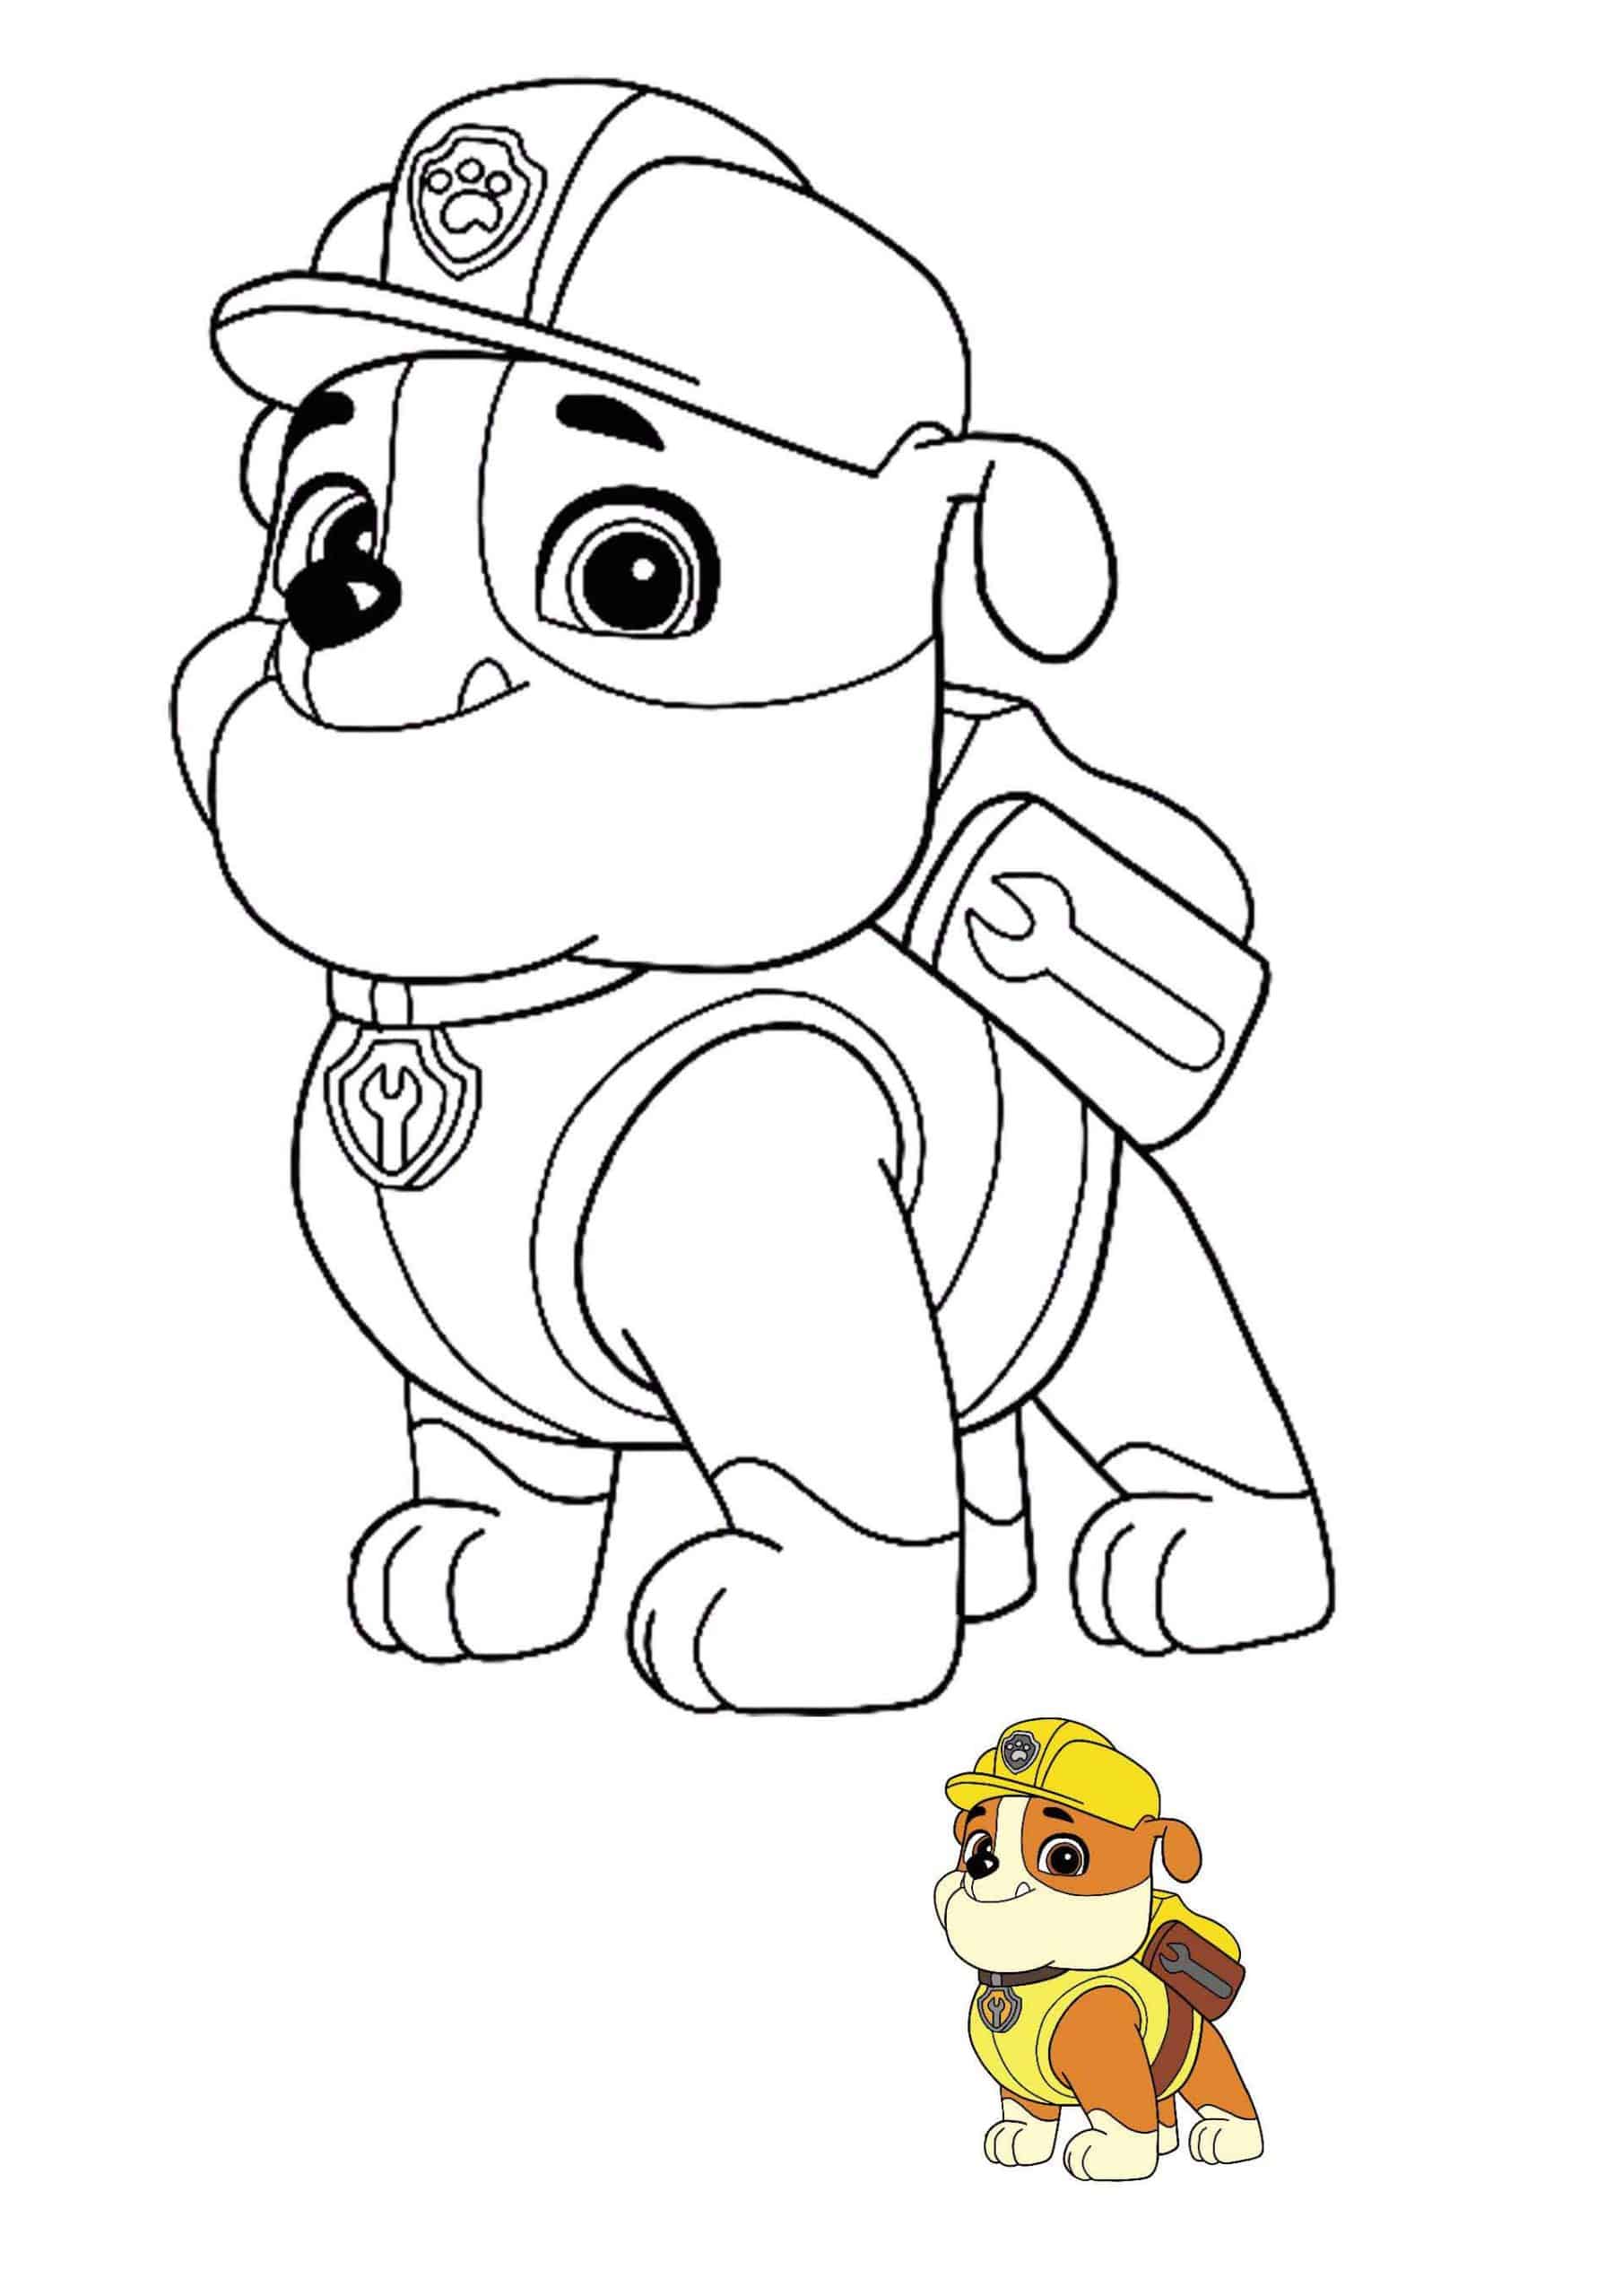 Rubble The Youngest Member Of The Paw Patrol Coloring Page